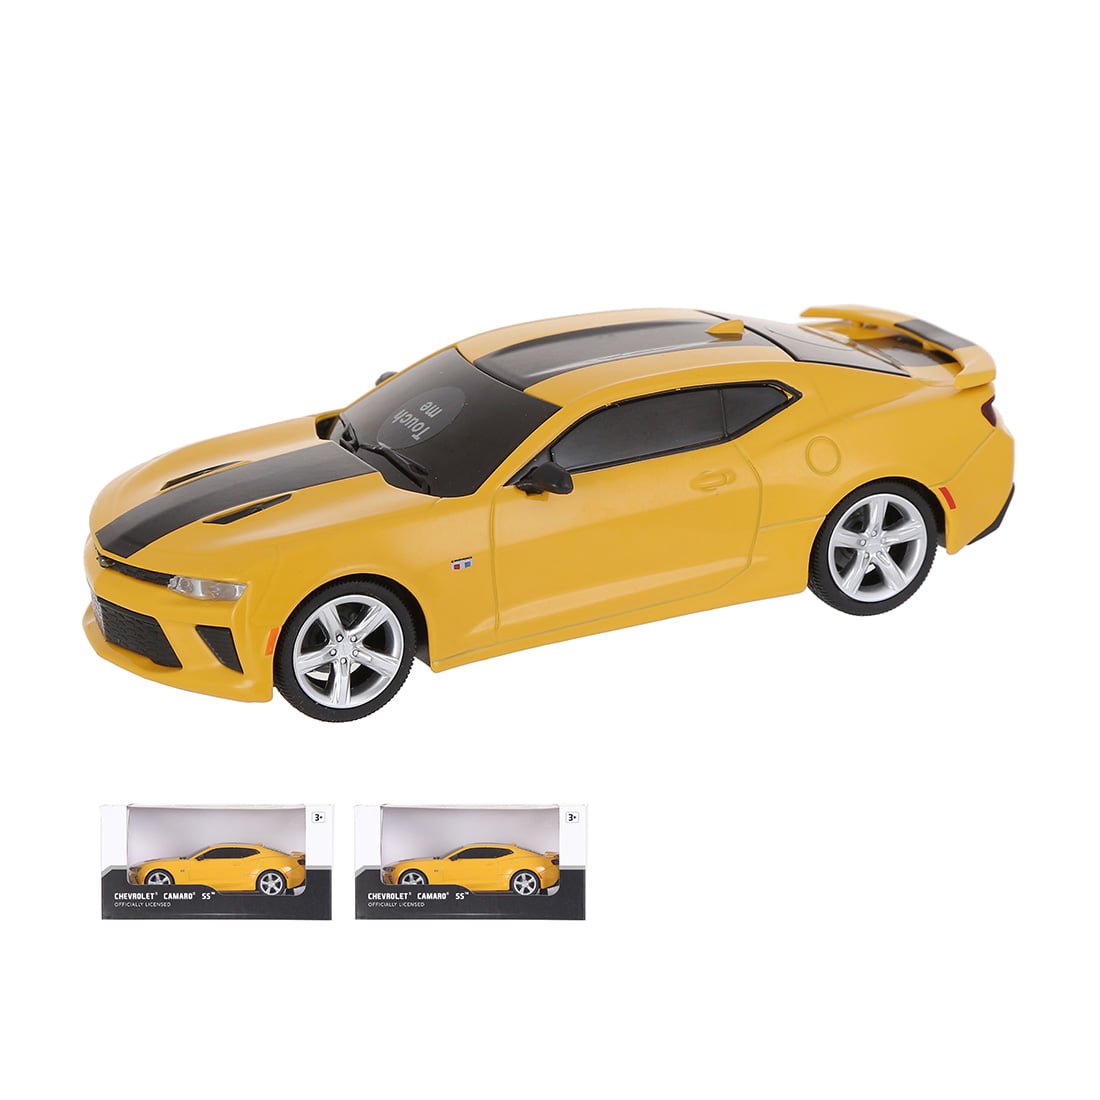 Model Diecast Car Scale Chevrolet Camaro SS Collectible Toy Cars 1/32